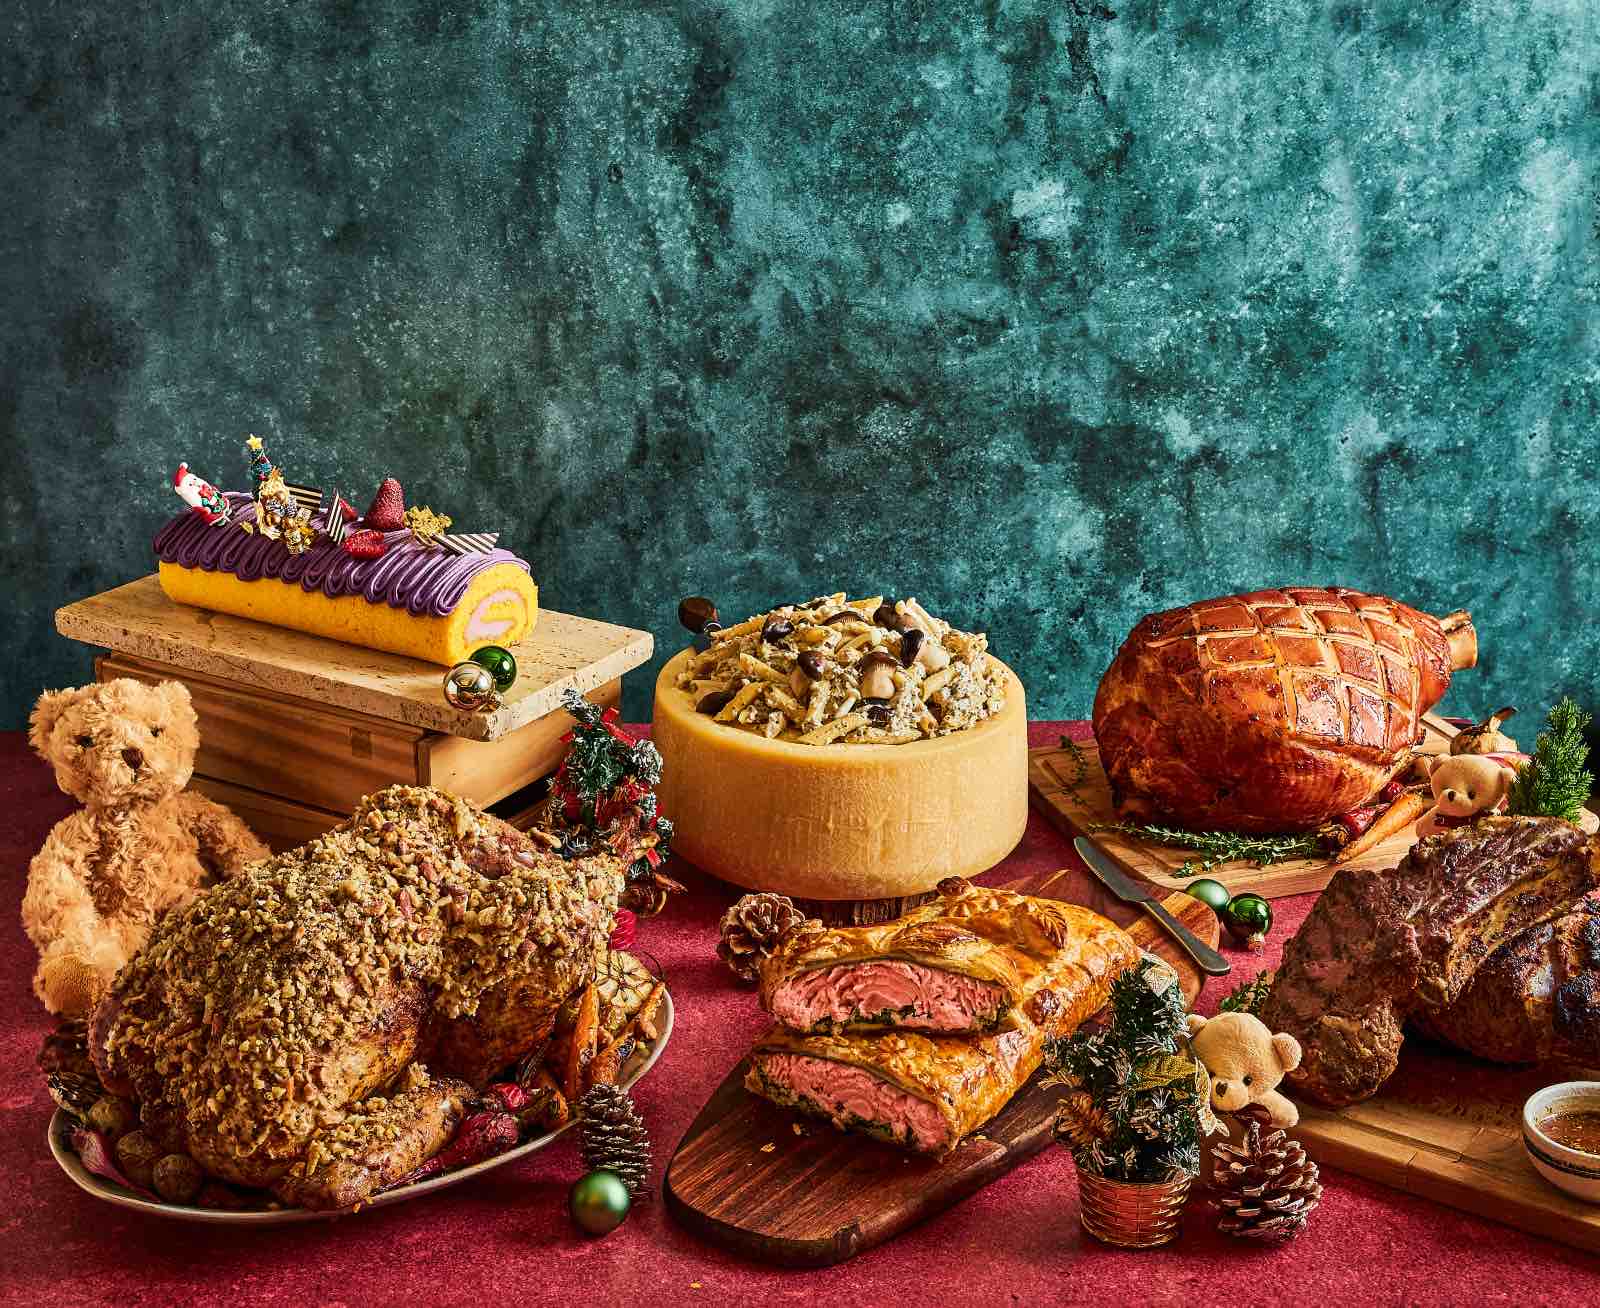 , It’s a feast! Celebrate Christmas with delicious festive buffet and takeaways at JEN Singapore Orchardgateway by Shangri-La